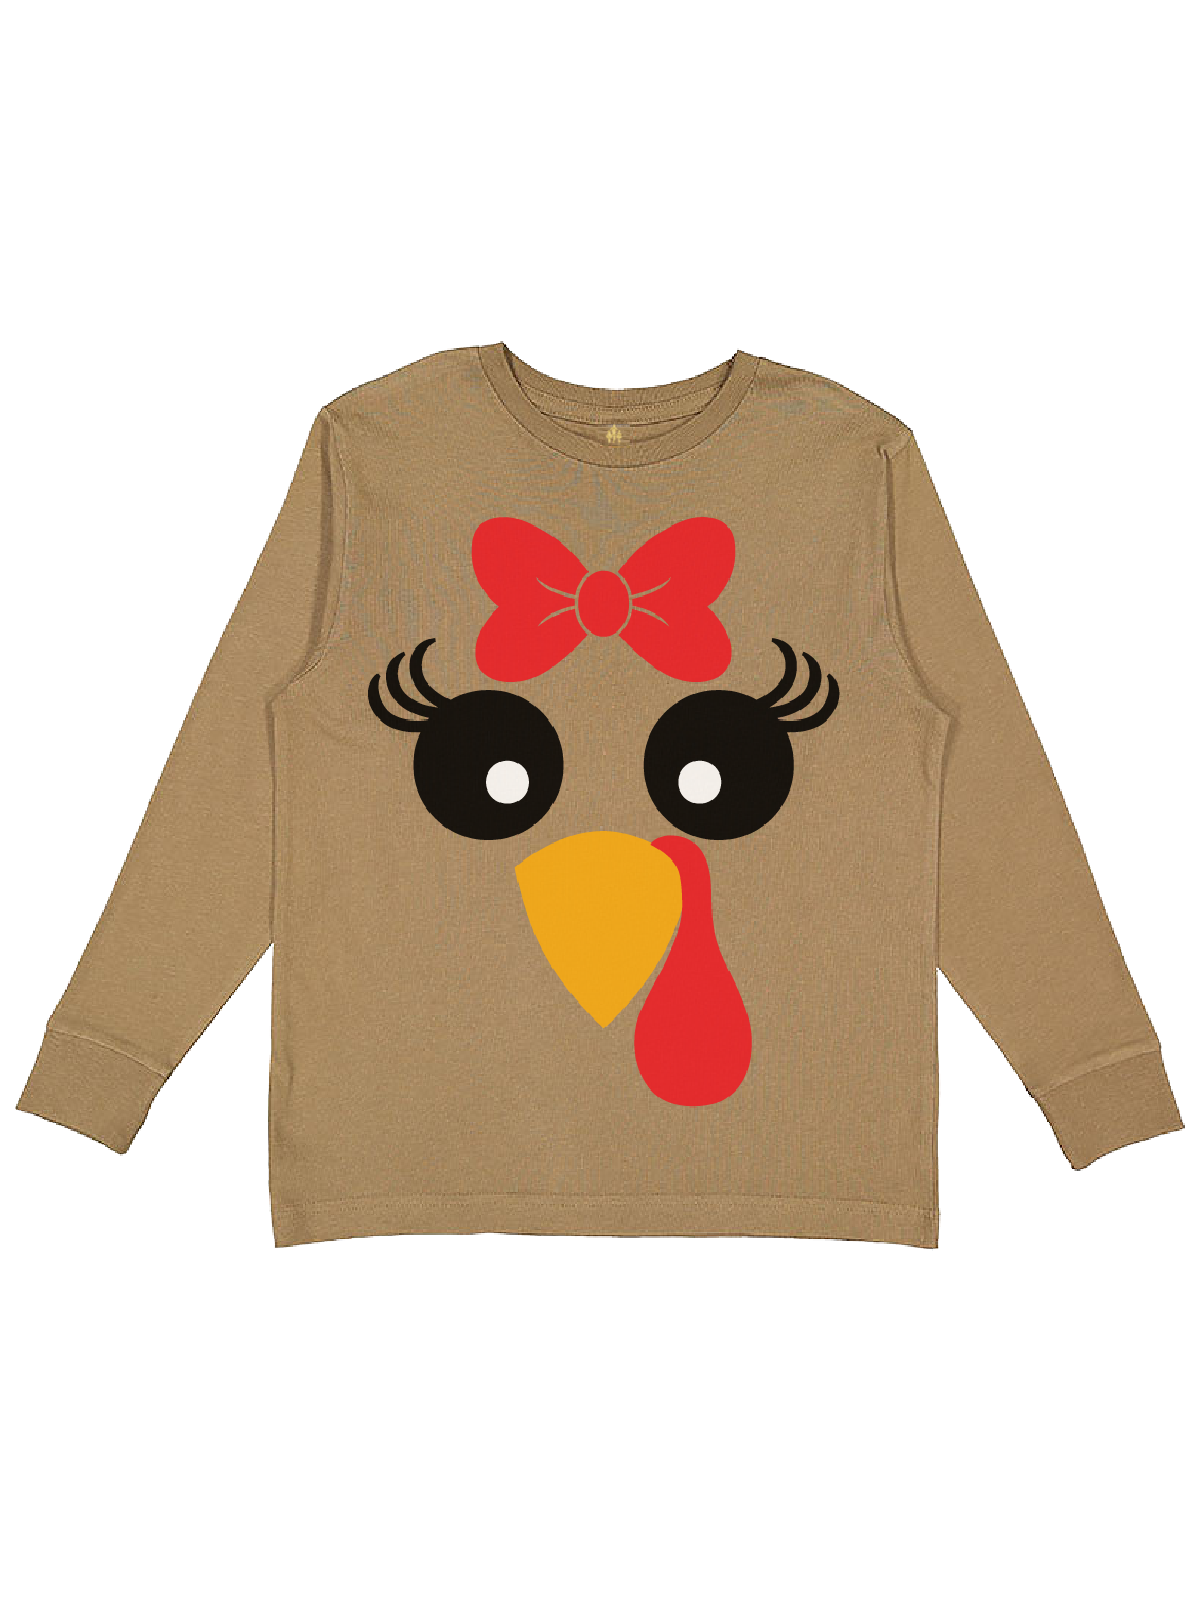 Girl Turkey Face Thanksgiving Shirt in Coyote Brown